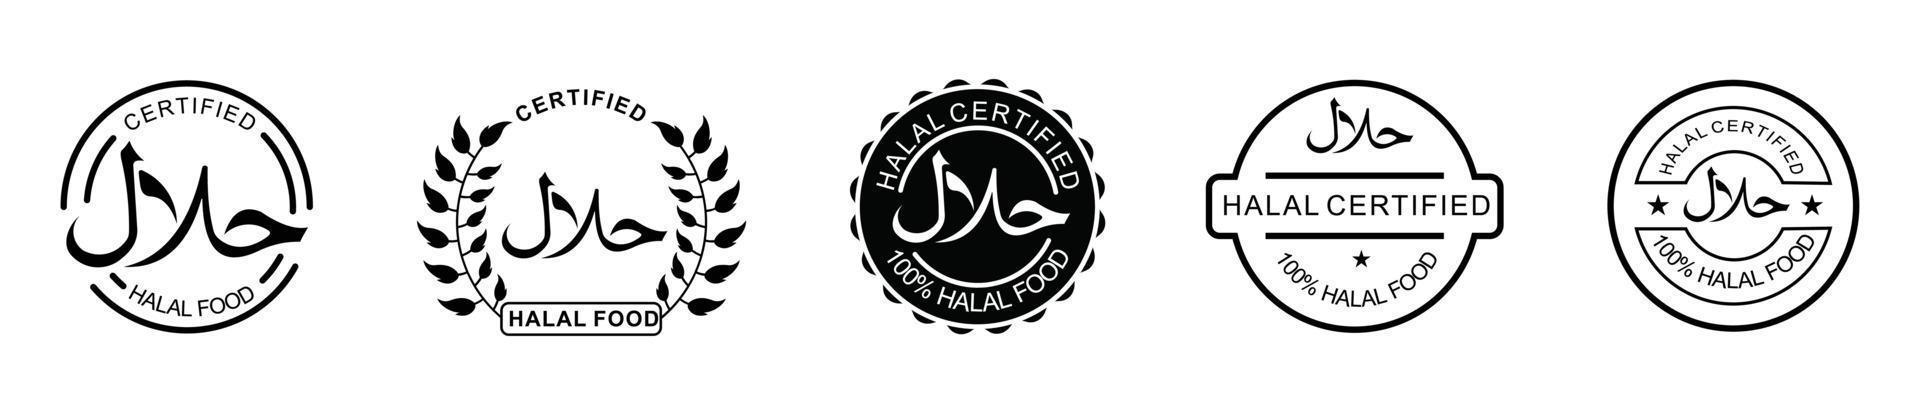 halal icon set  product emblem  vector illustration. Set of halal food products labels ,Vector Halal sign certificate tag.